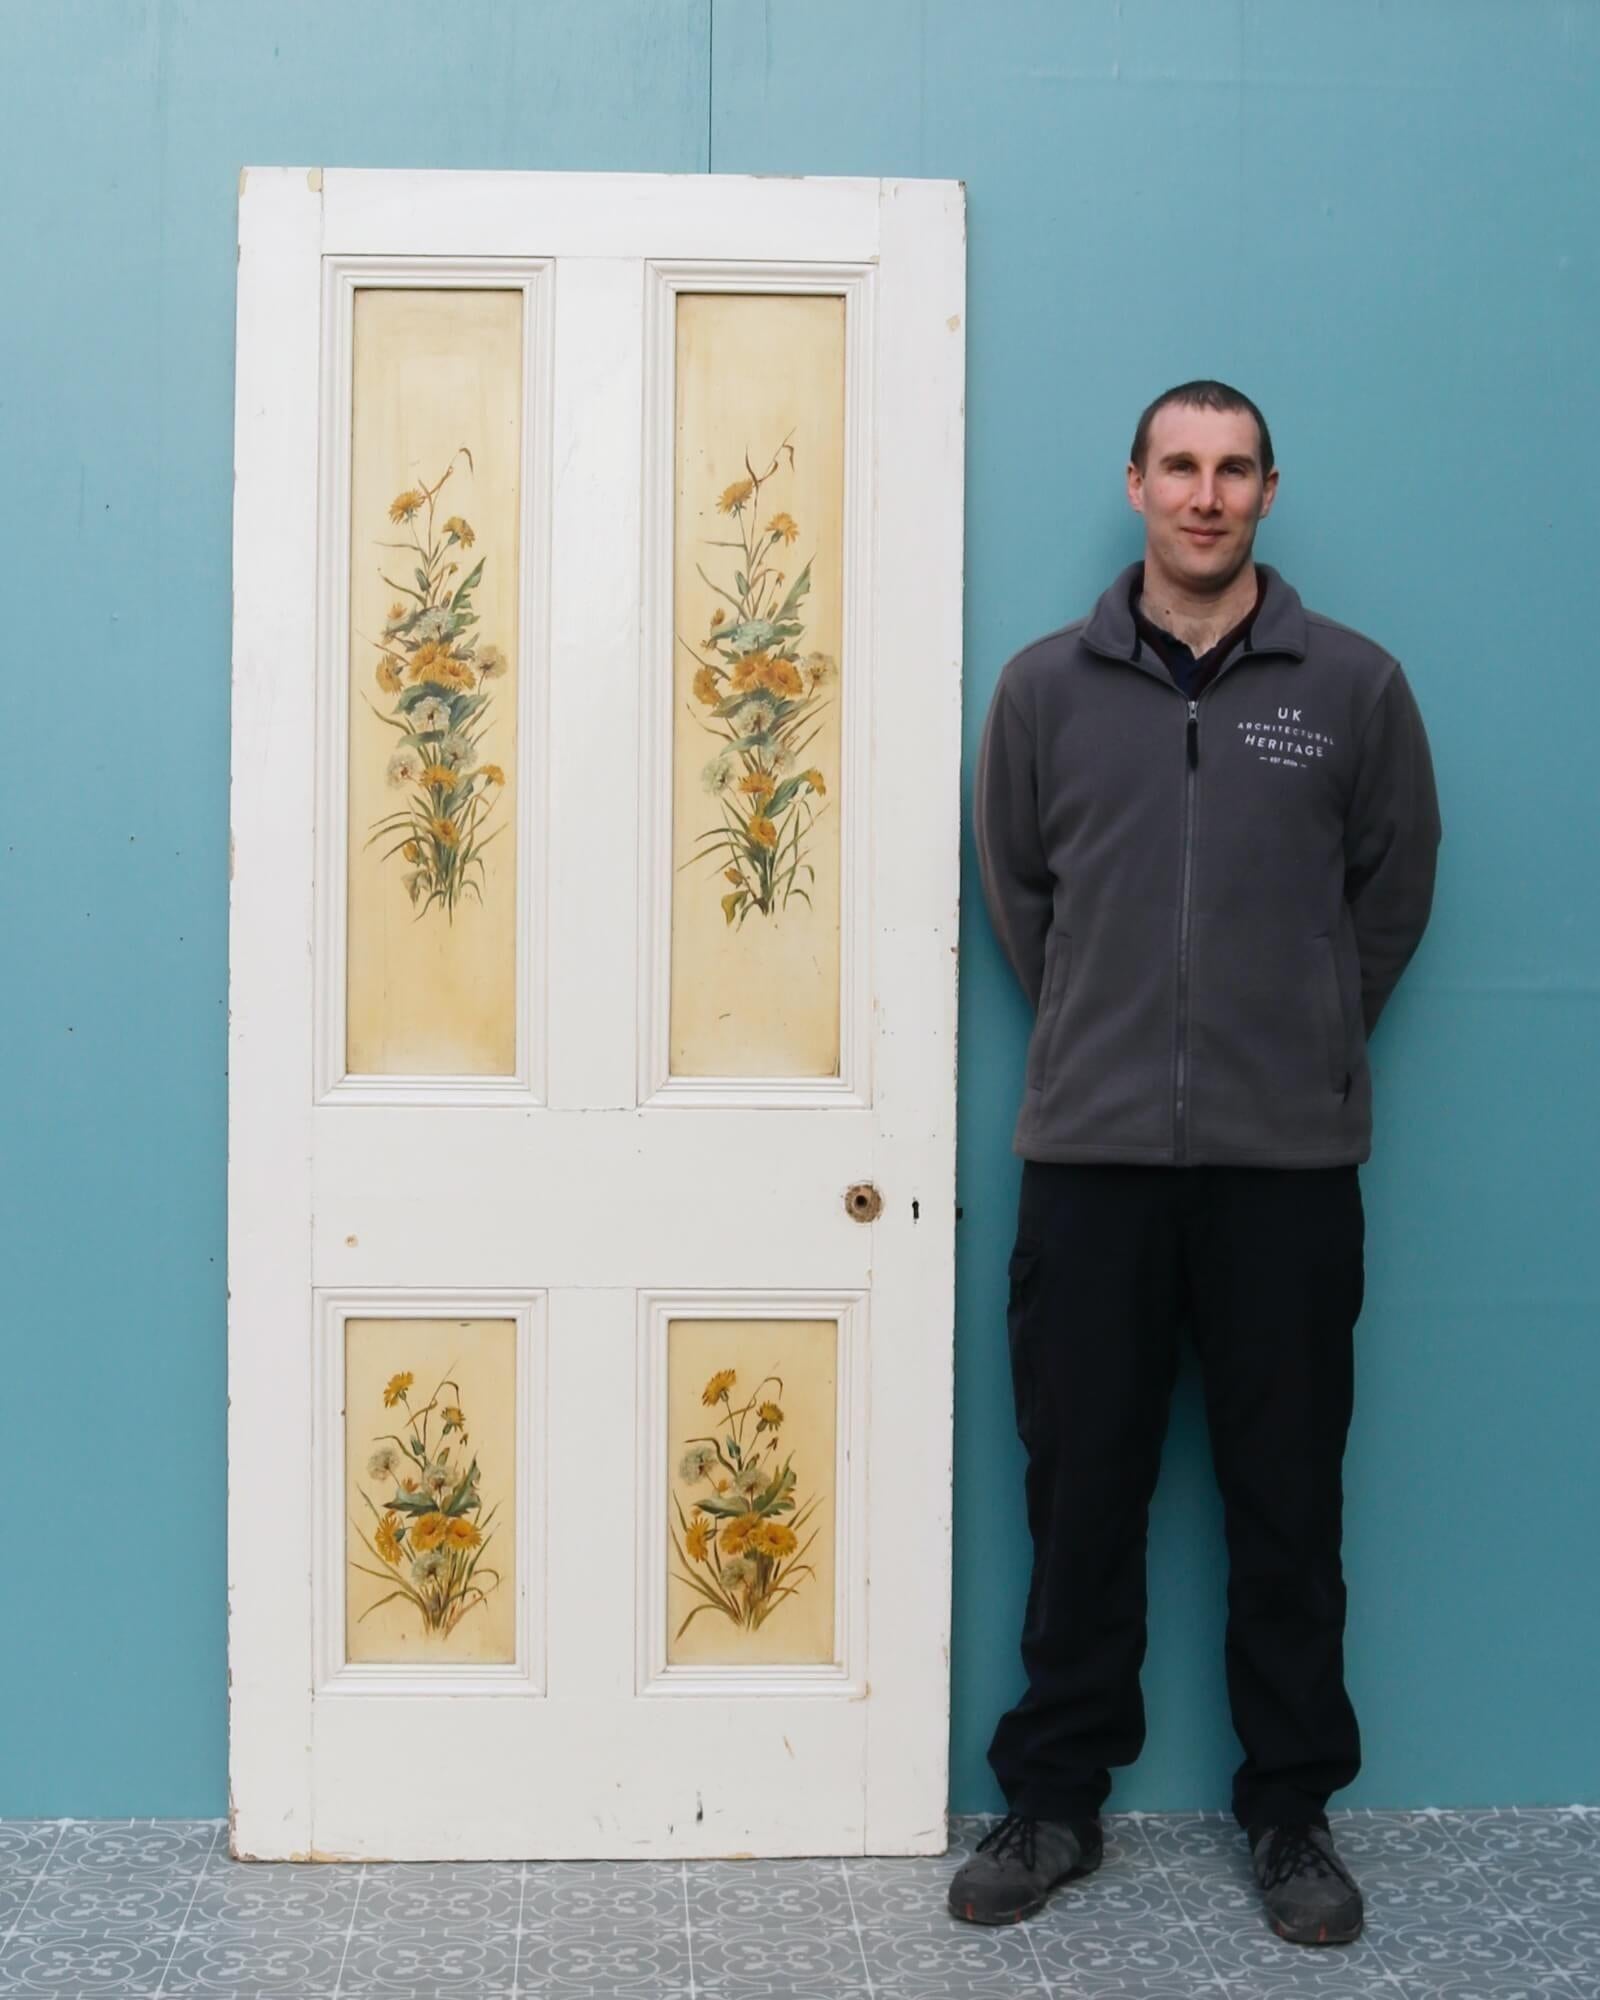 Dating from the late 19th century, this Victorian 4-panel internal door is beautifully hand-painted on one side with dandelions and foliage. While doors are often easily overlooked, this antique English internal door will certainly not pass by